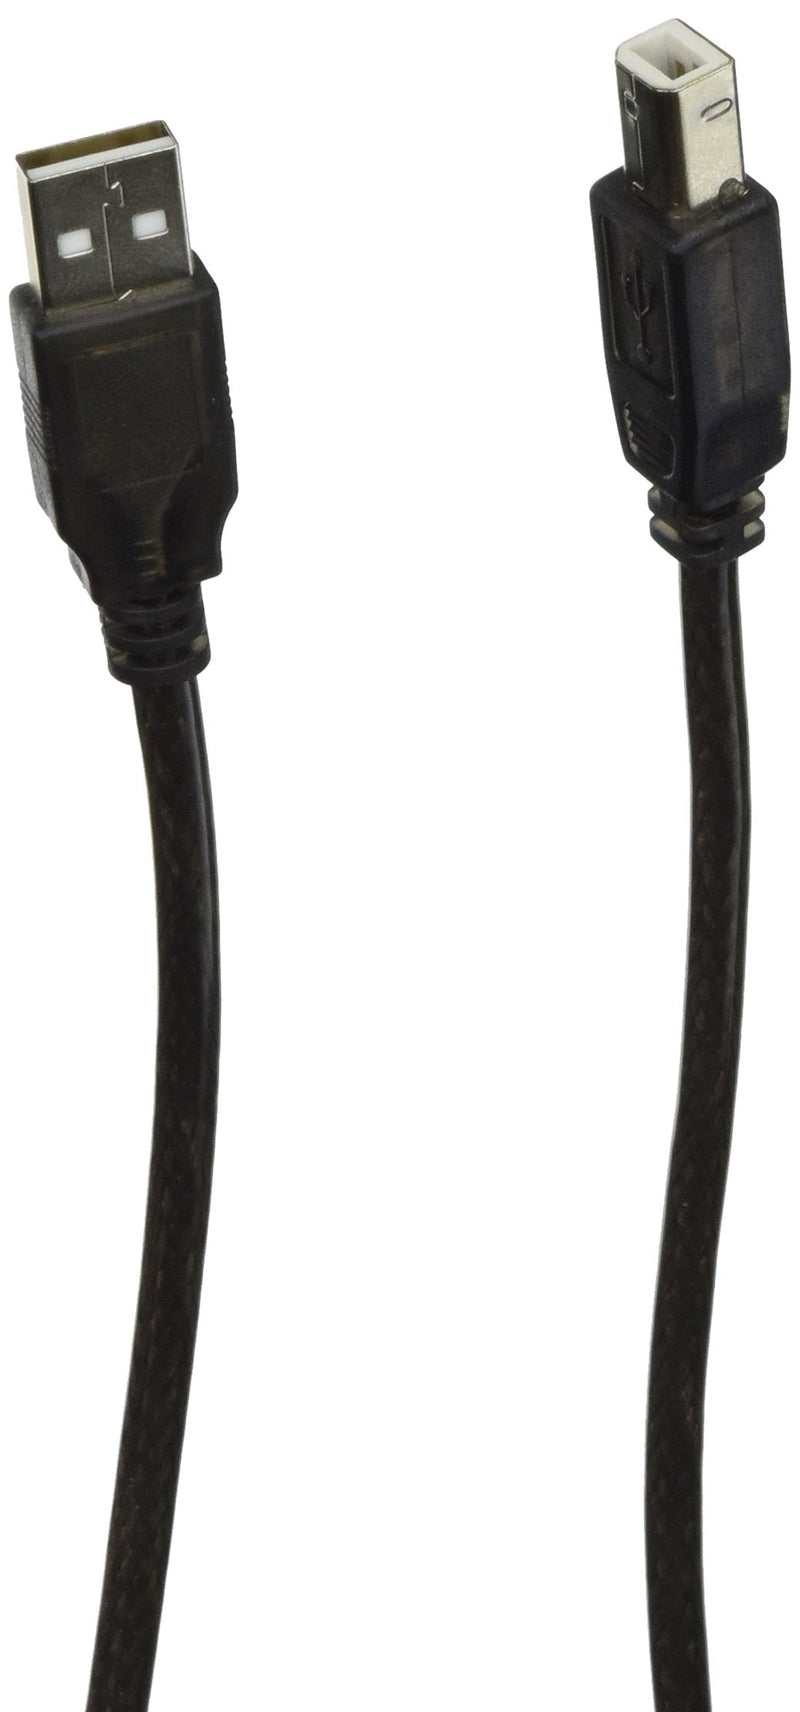  [AUSTRALIA] - Monoprice USB-A to USB-B 2.0 Cable - Active 28/24AWG Black 49ft 49 Feet